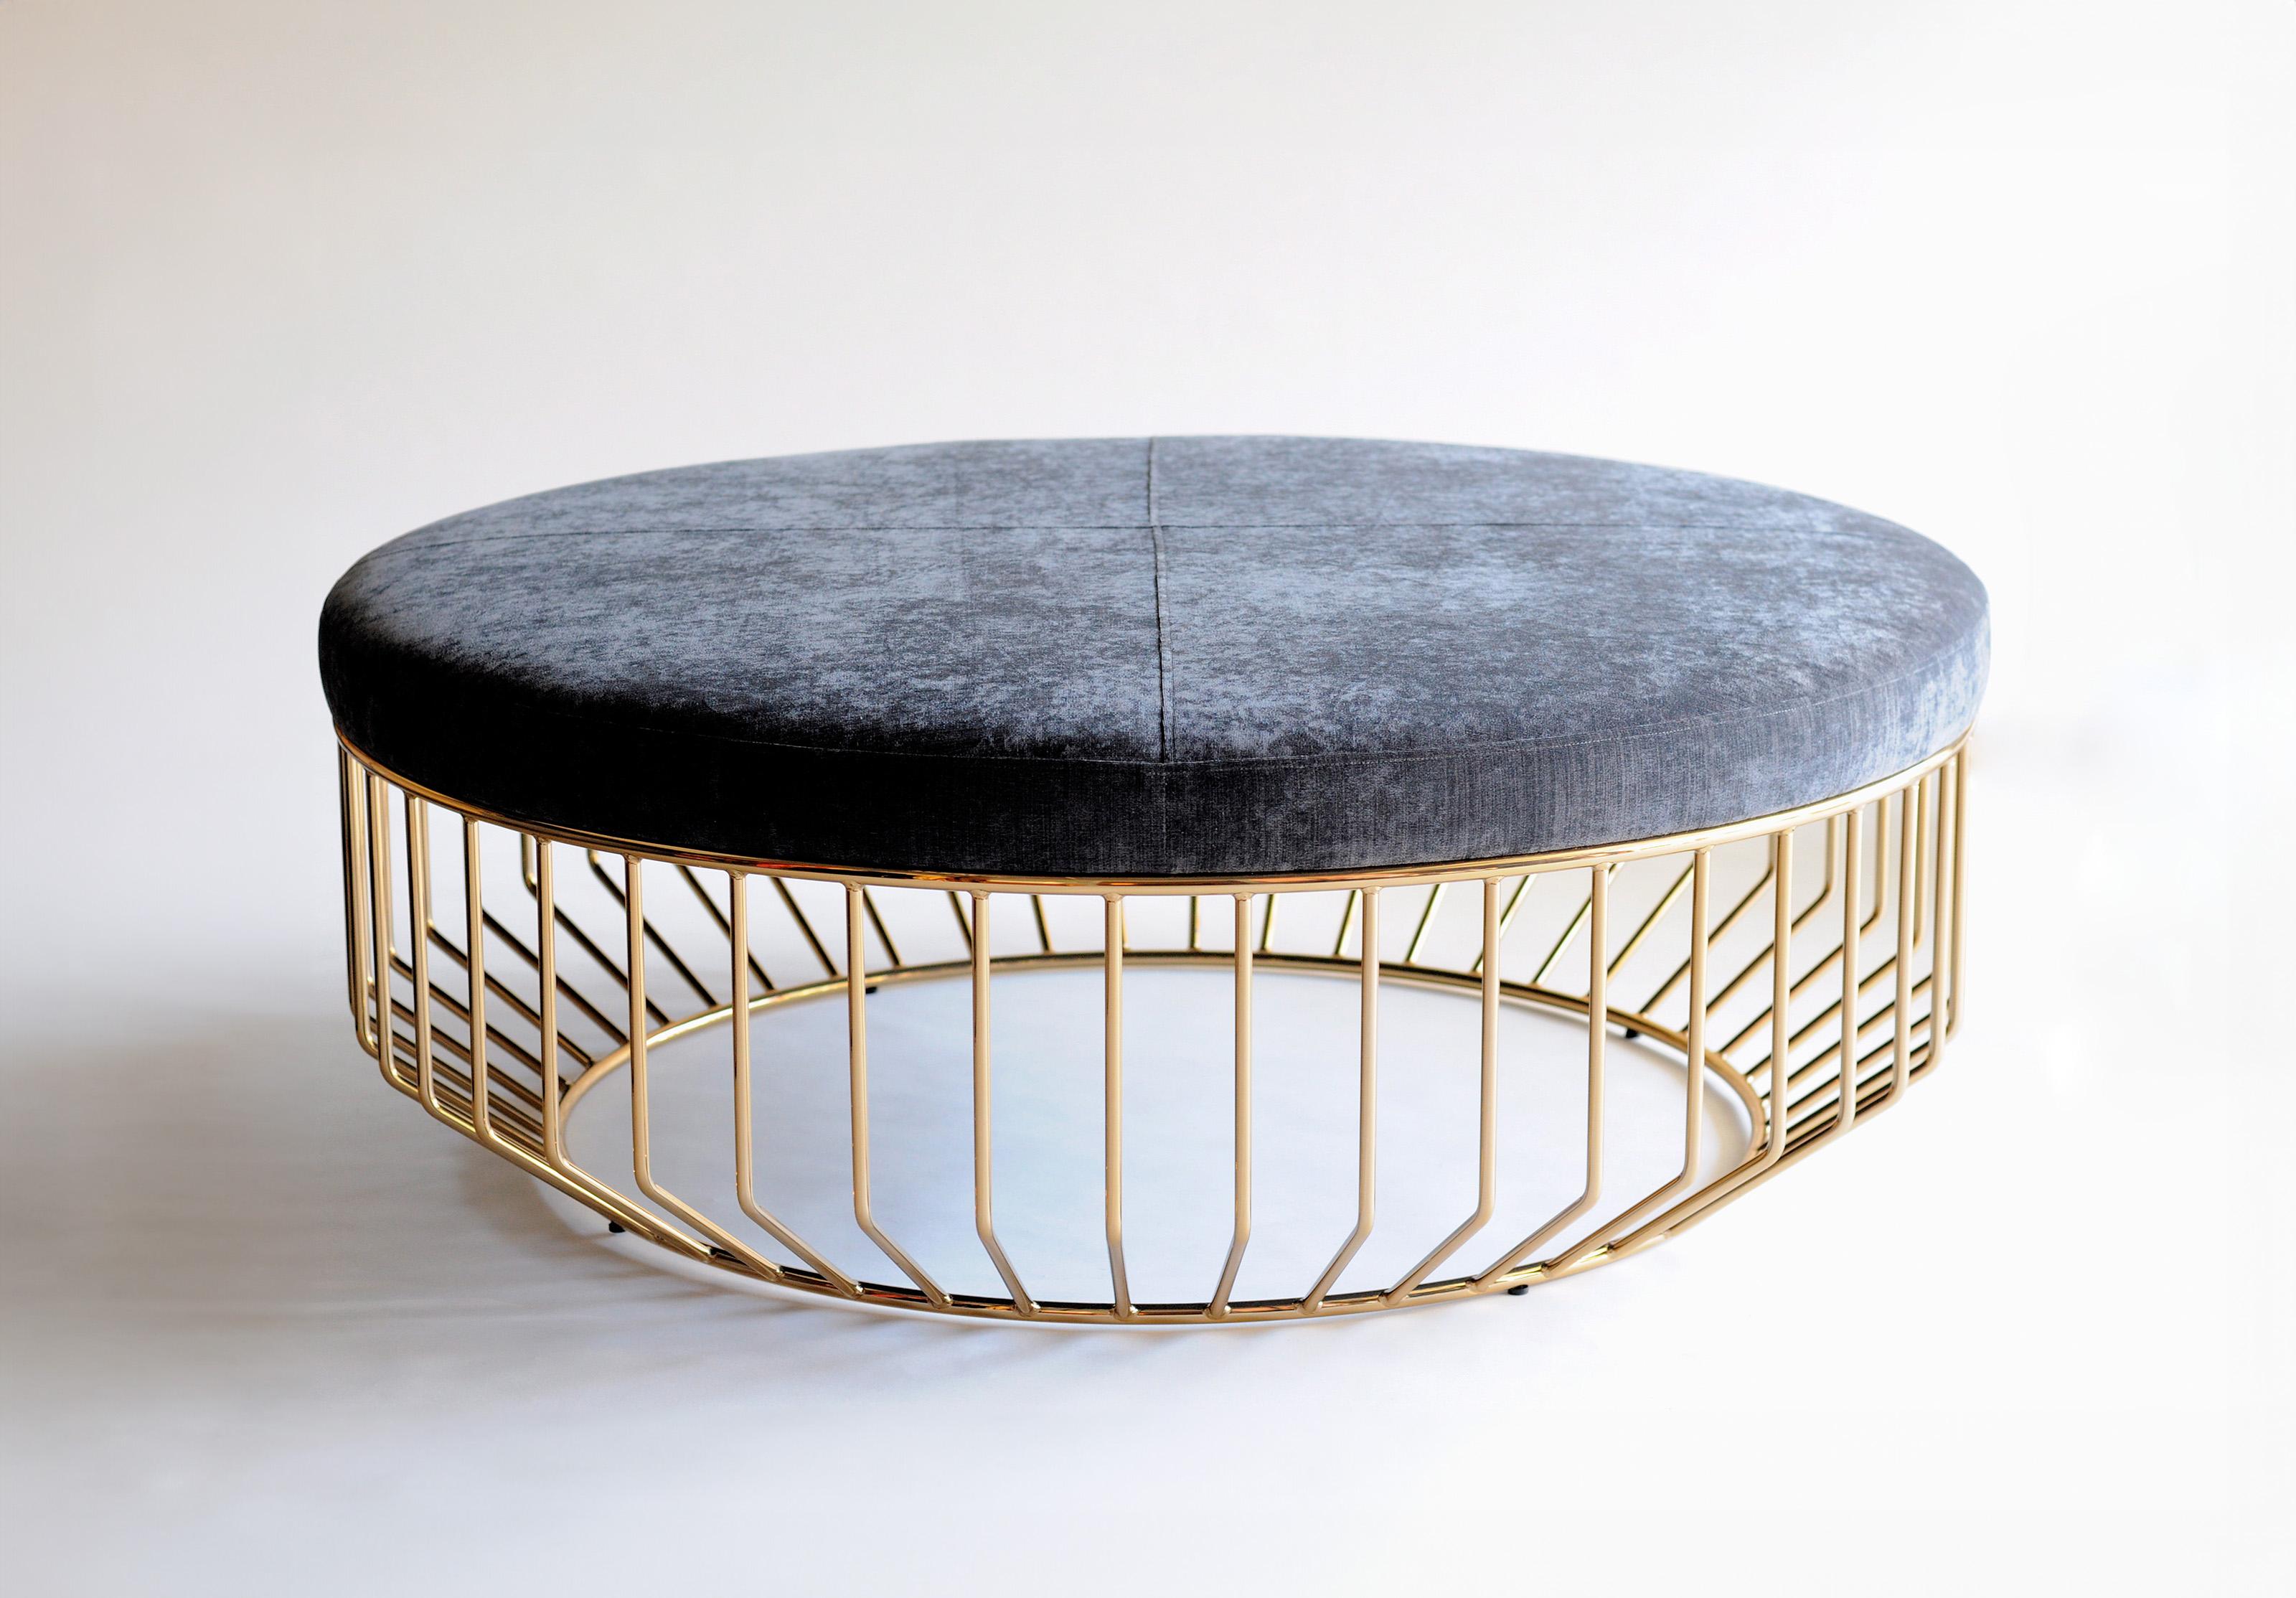 Wired Large Ottoman by Phase Design
Dimensions: Ø 106.7 x H 35.6 cm. 
Materials: Smoked brass and upholstery.

Solid steel bar with upholstered tops. Steel available in gloss or flat black and white, polished chrome, burnt copper, or smoked brass